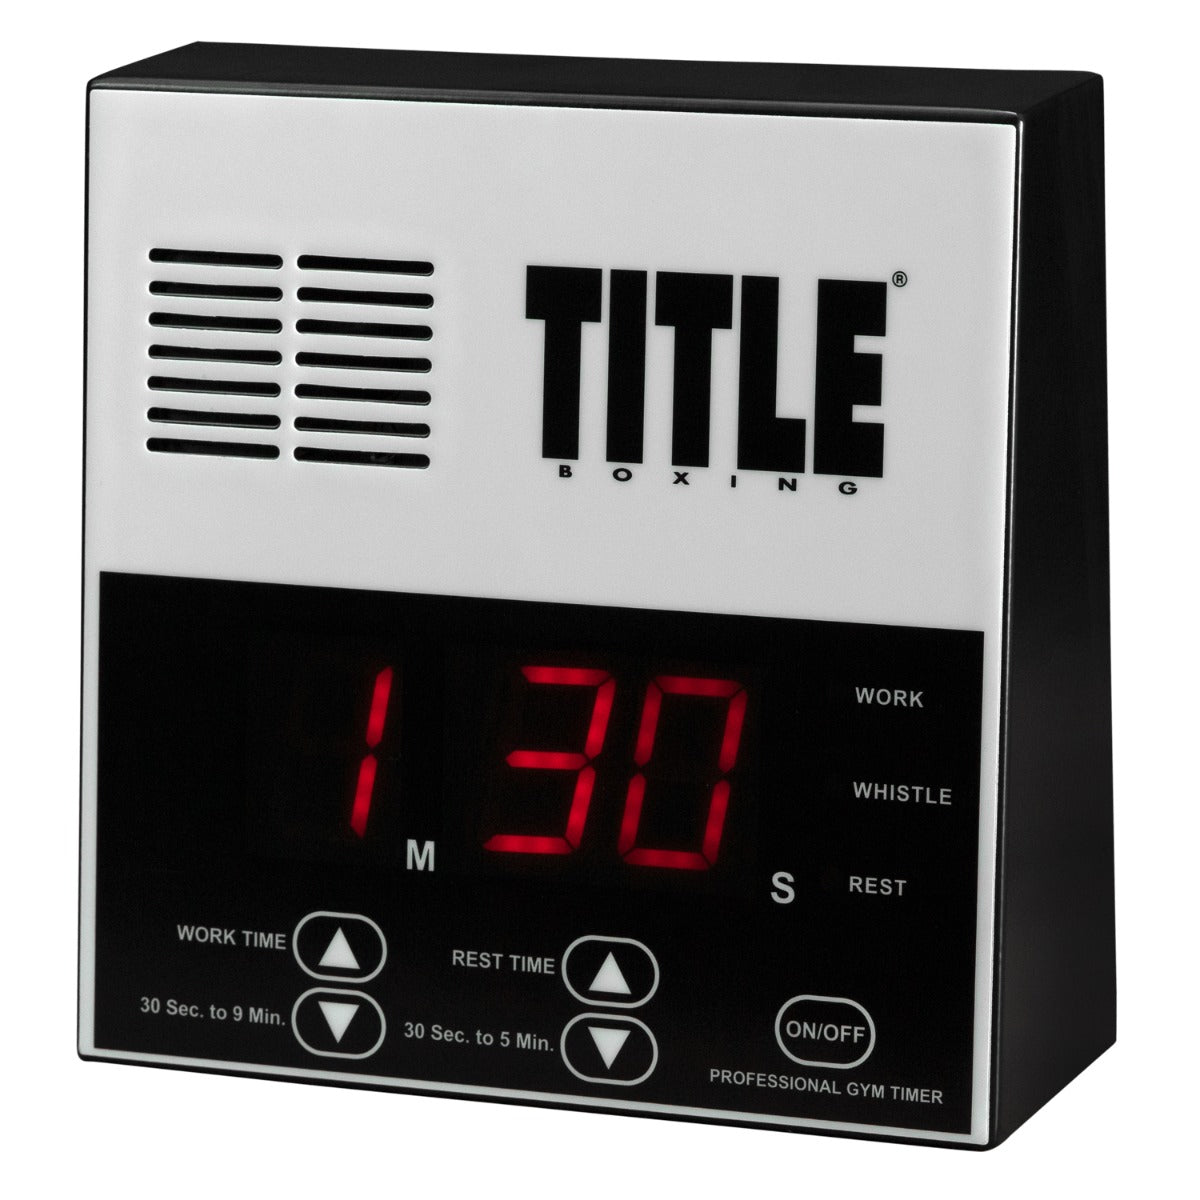 TITLE Professional Gym Timer